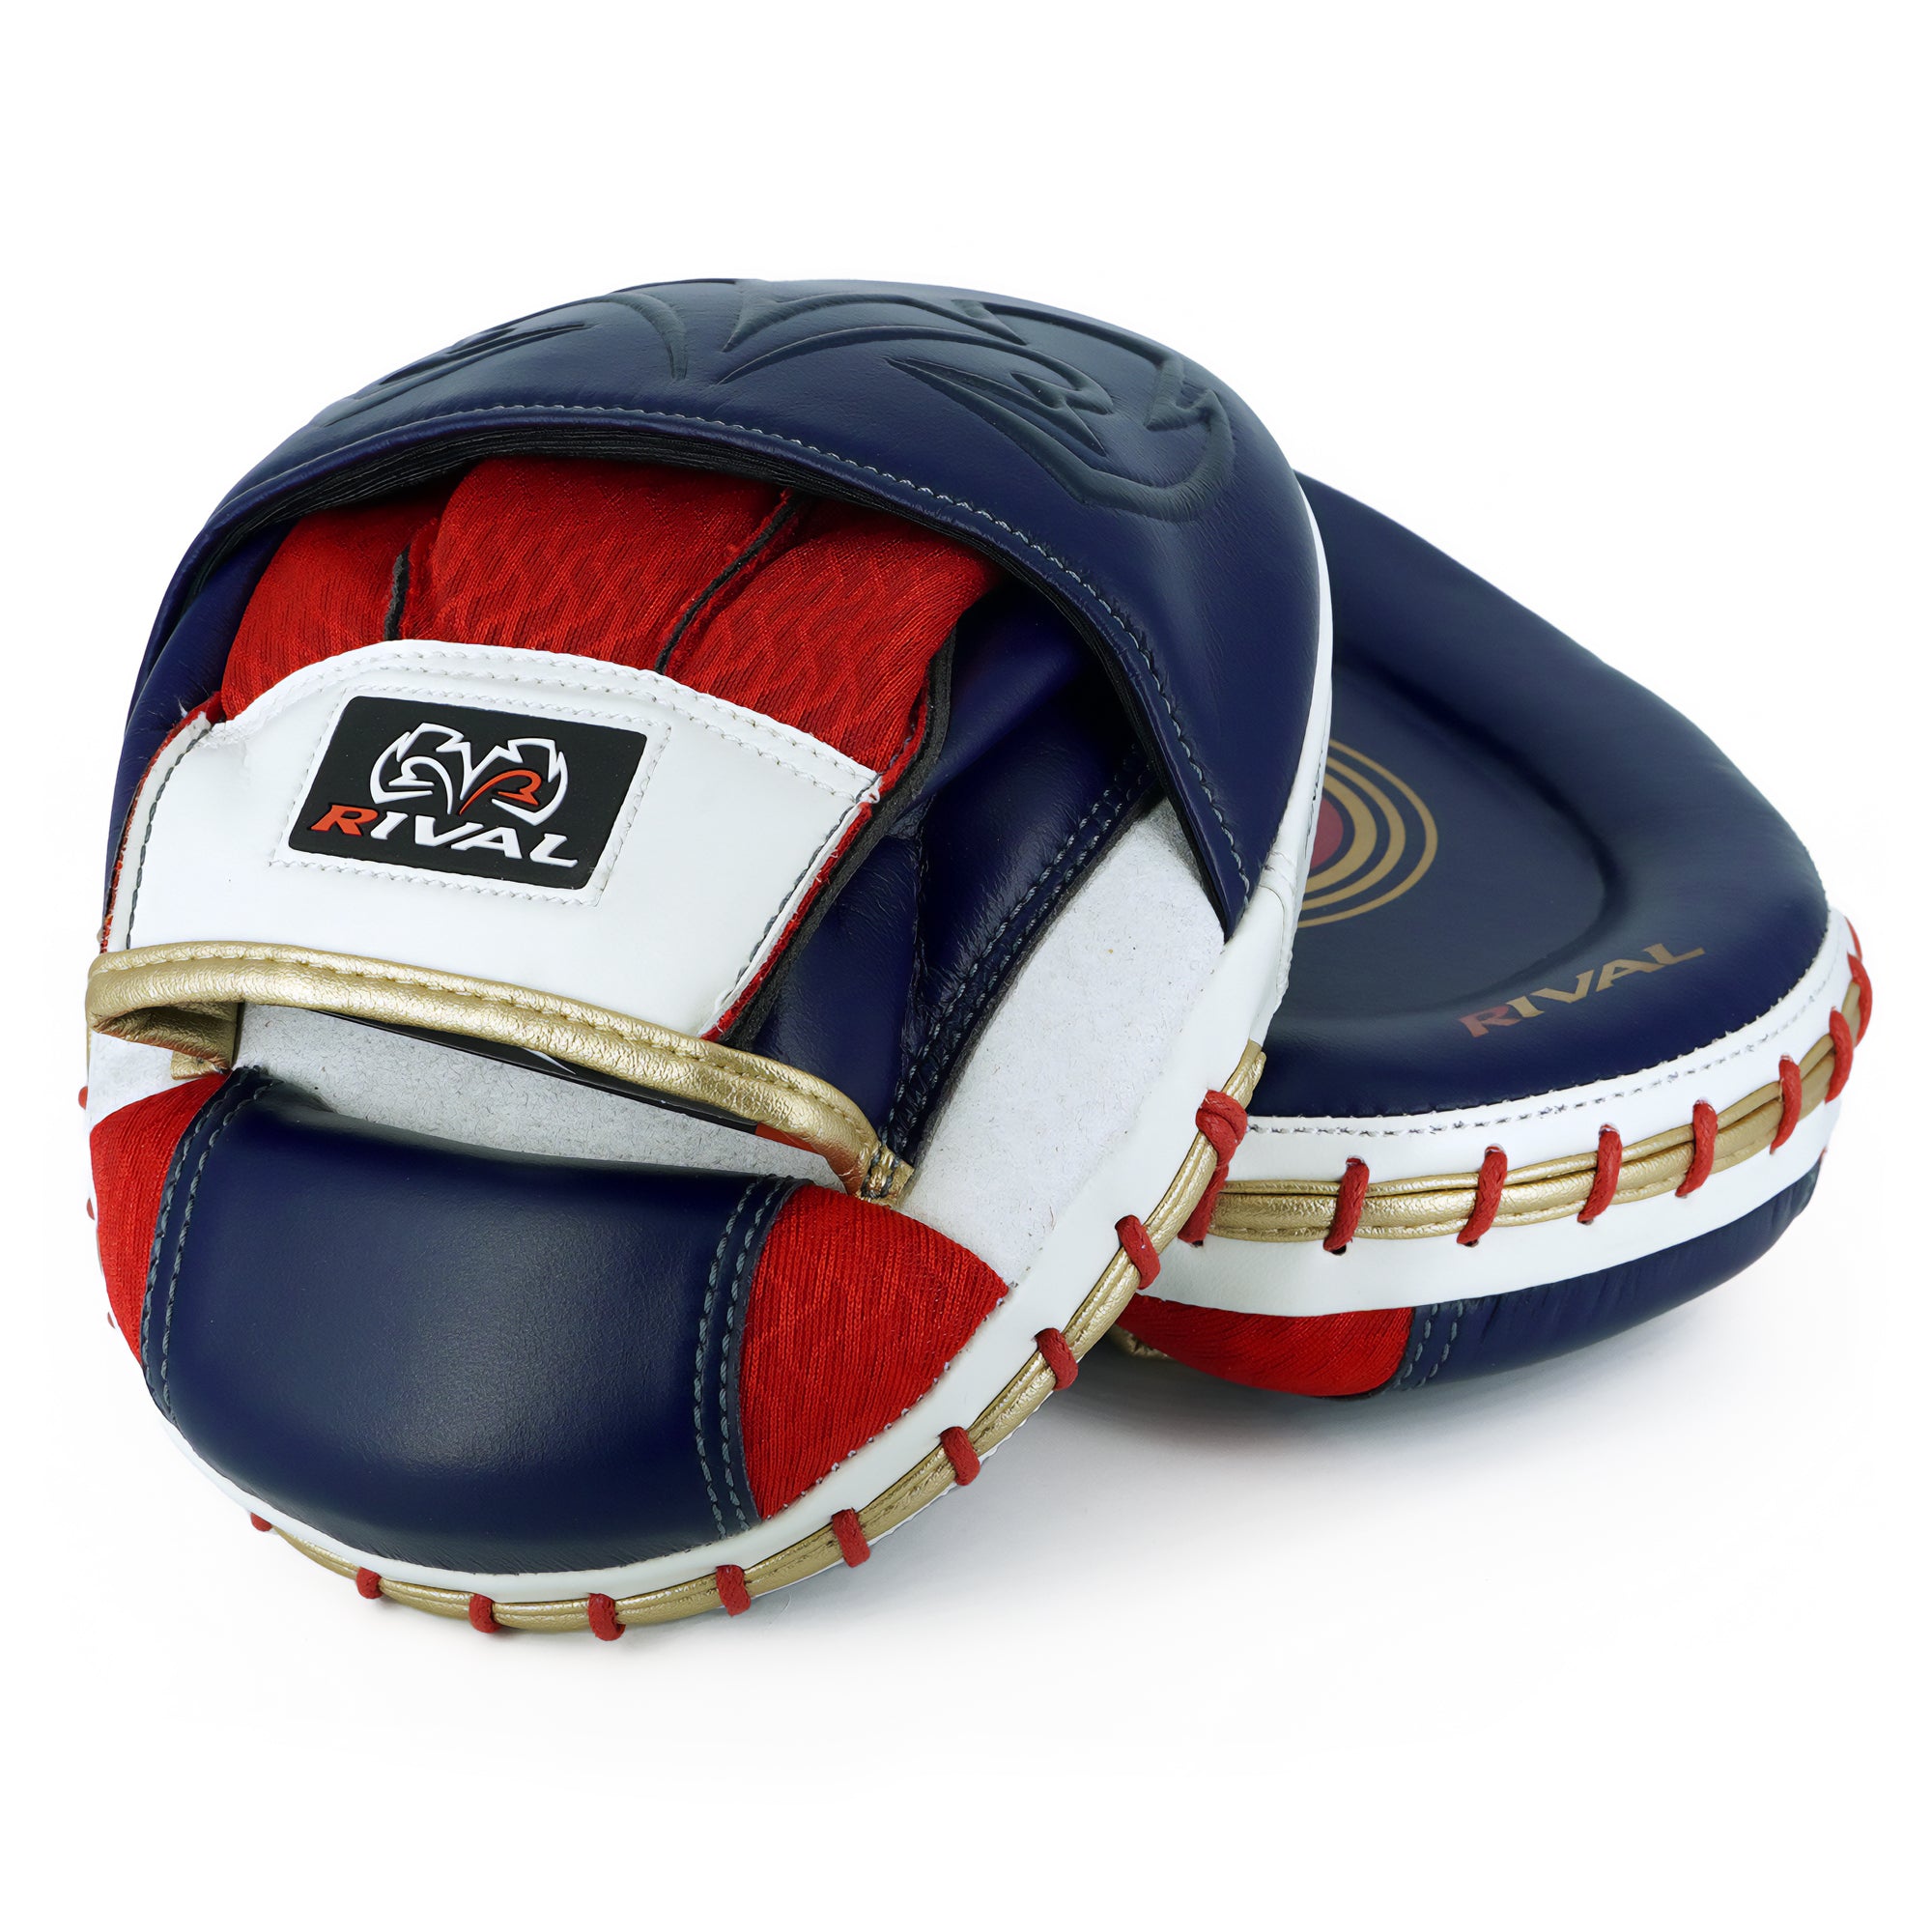 Rival Boxing RPM80 Impulse Punch Mitts RIVAL